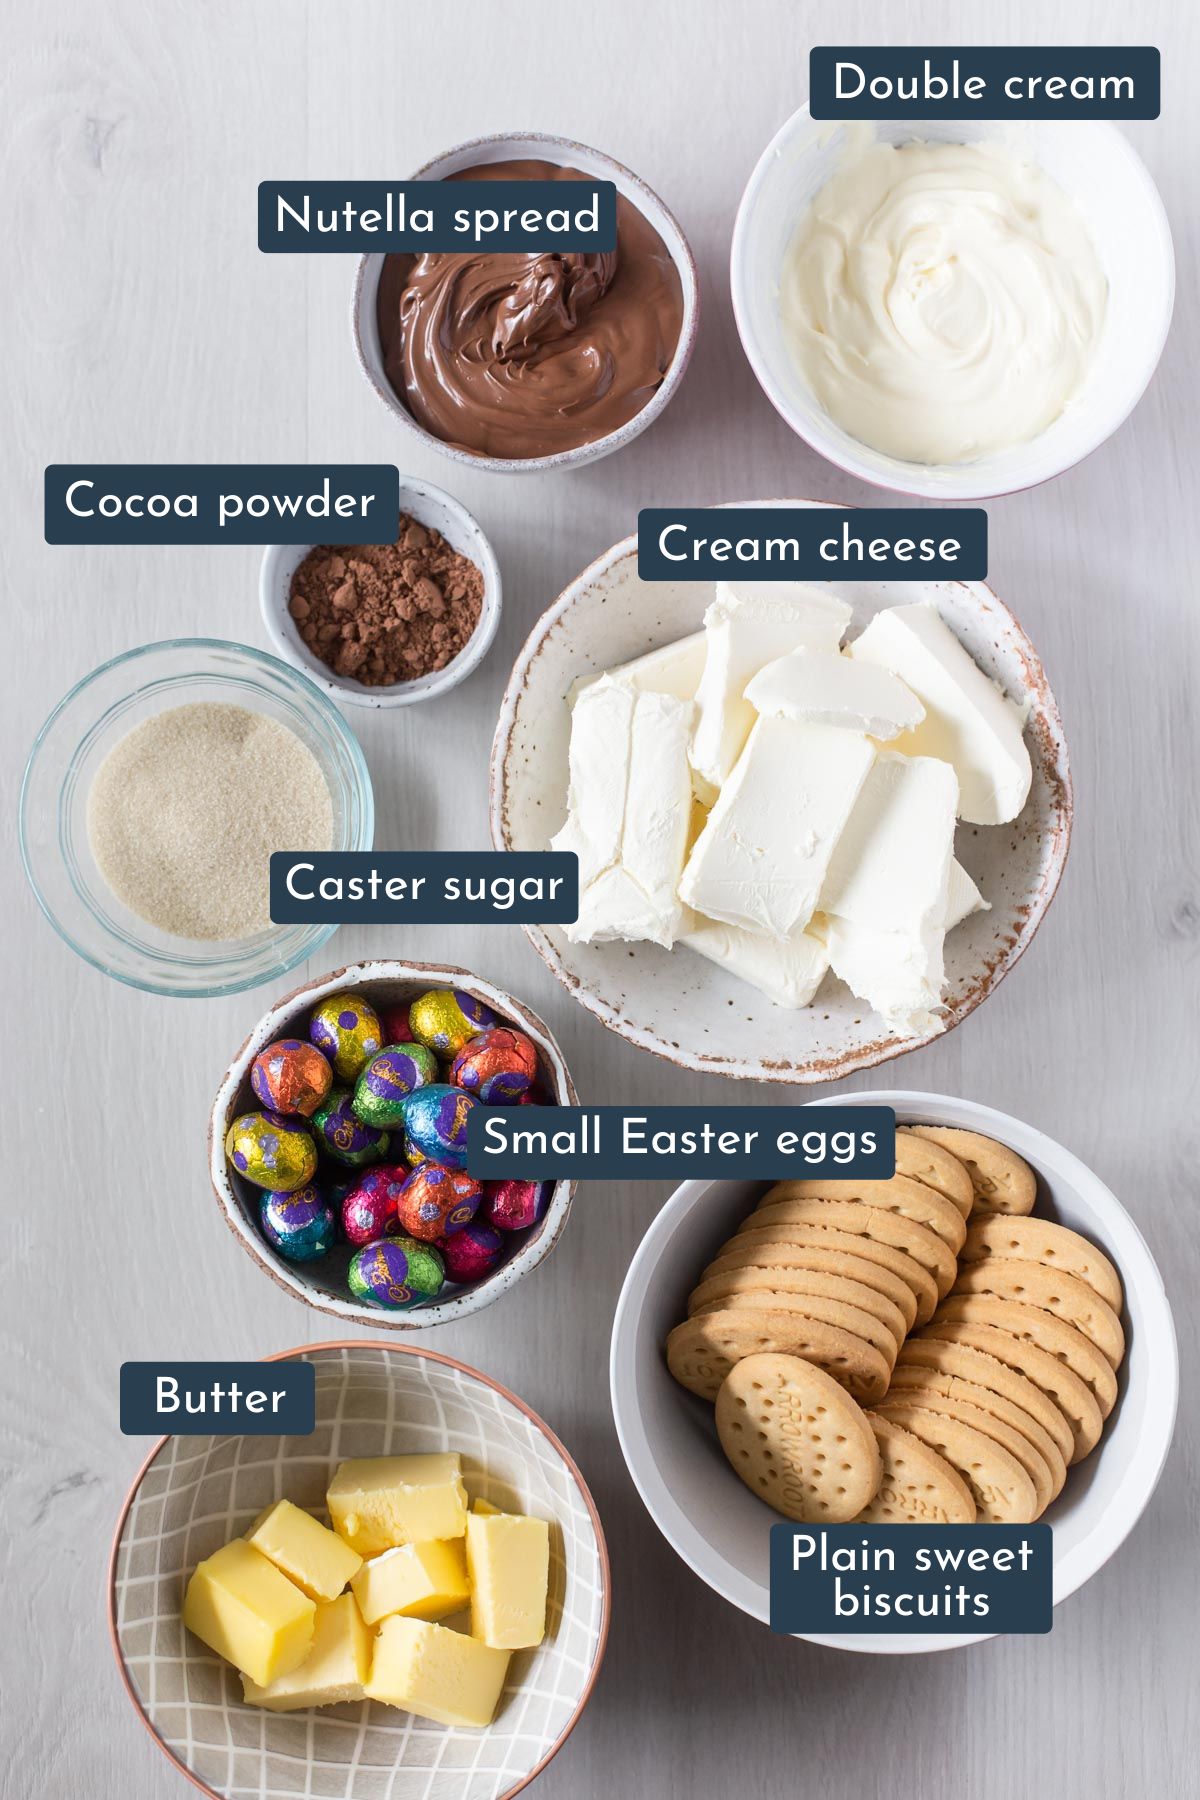 Ingredients to make Easter Nutella No Bake Cheesecake is cream cheese block, plain sweet biscuits, butter, cocoa powder, small easter eggs, double cream, caster sugar and nutella.